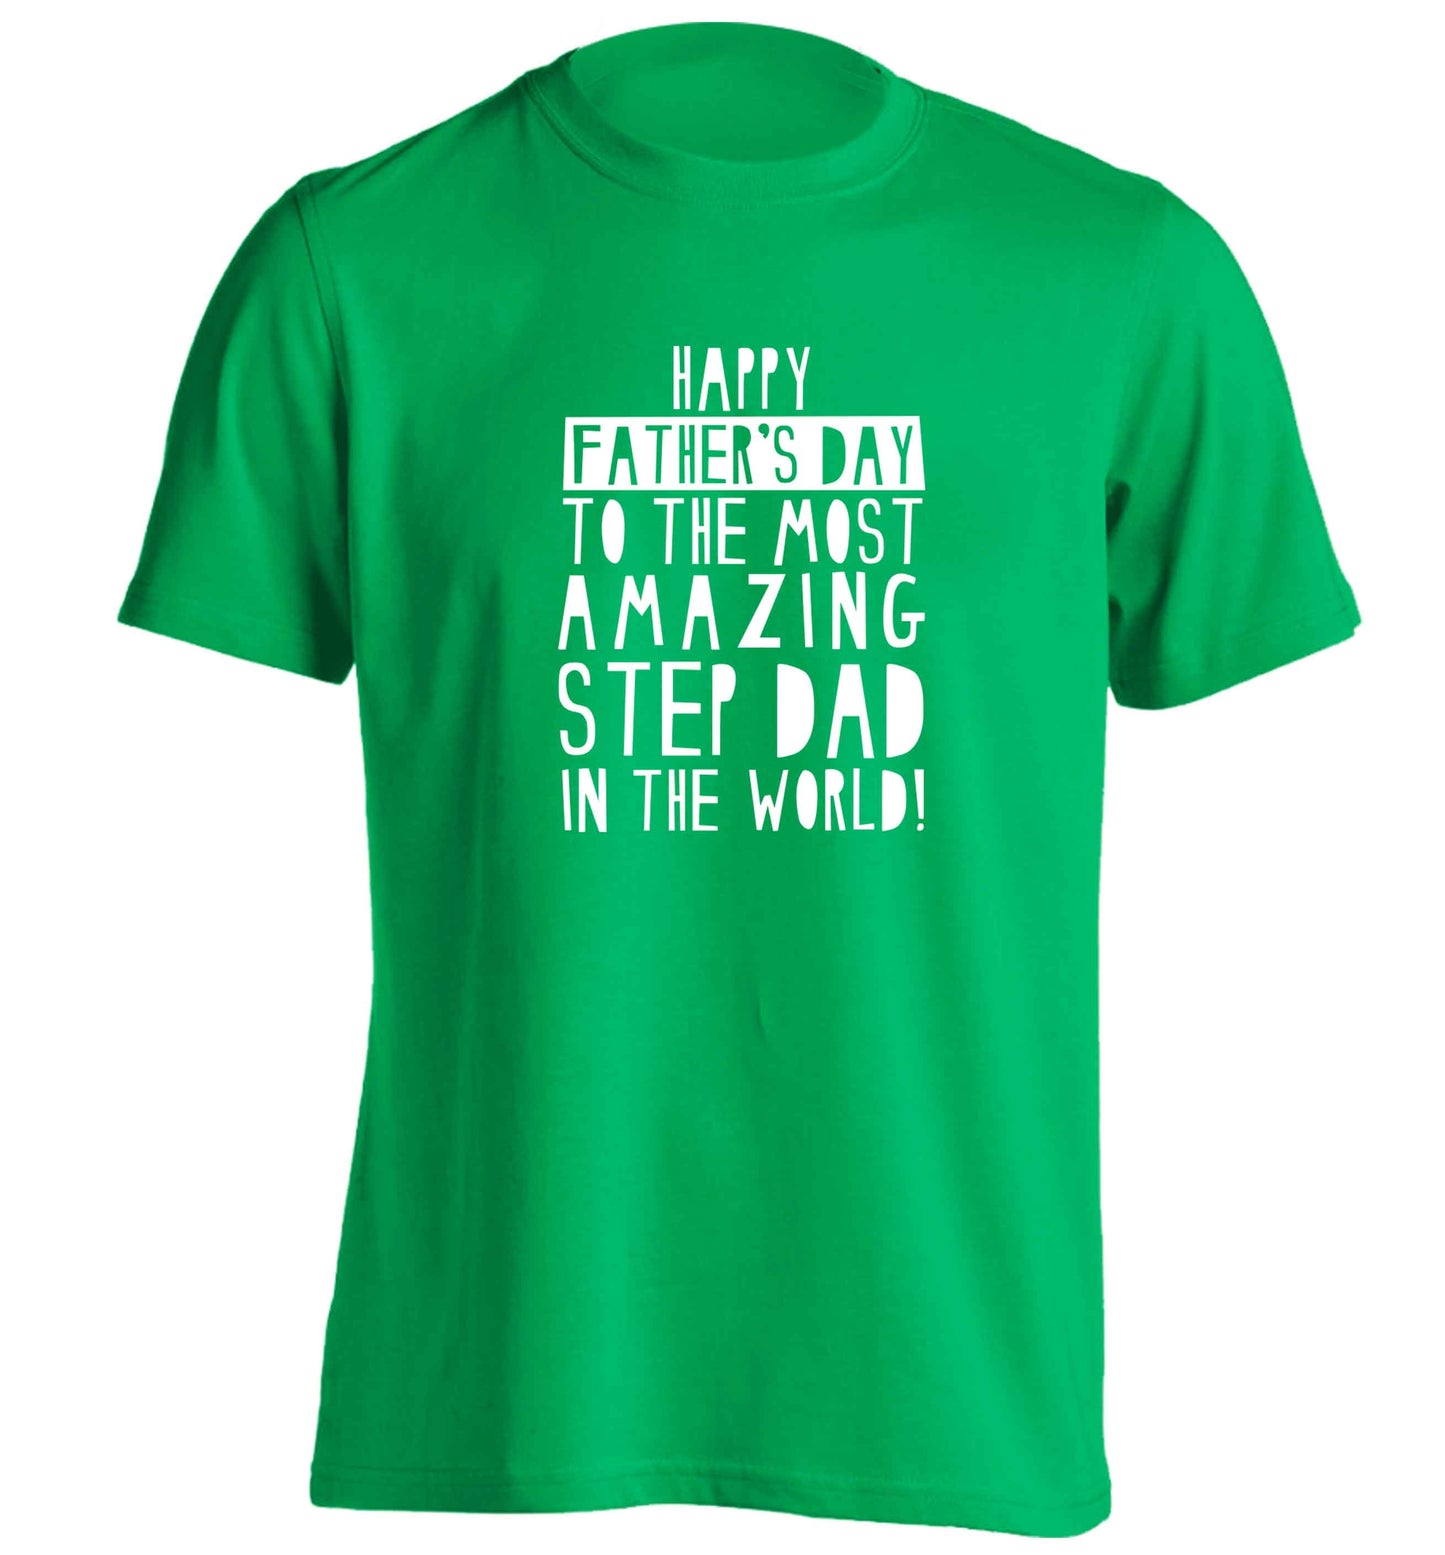 Happy Father's day to the best step dad in the world adults unisex green Tshirt 2XL